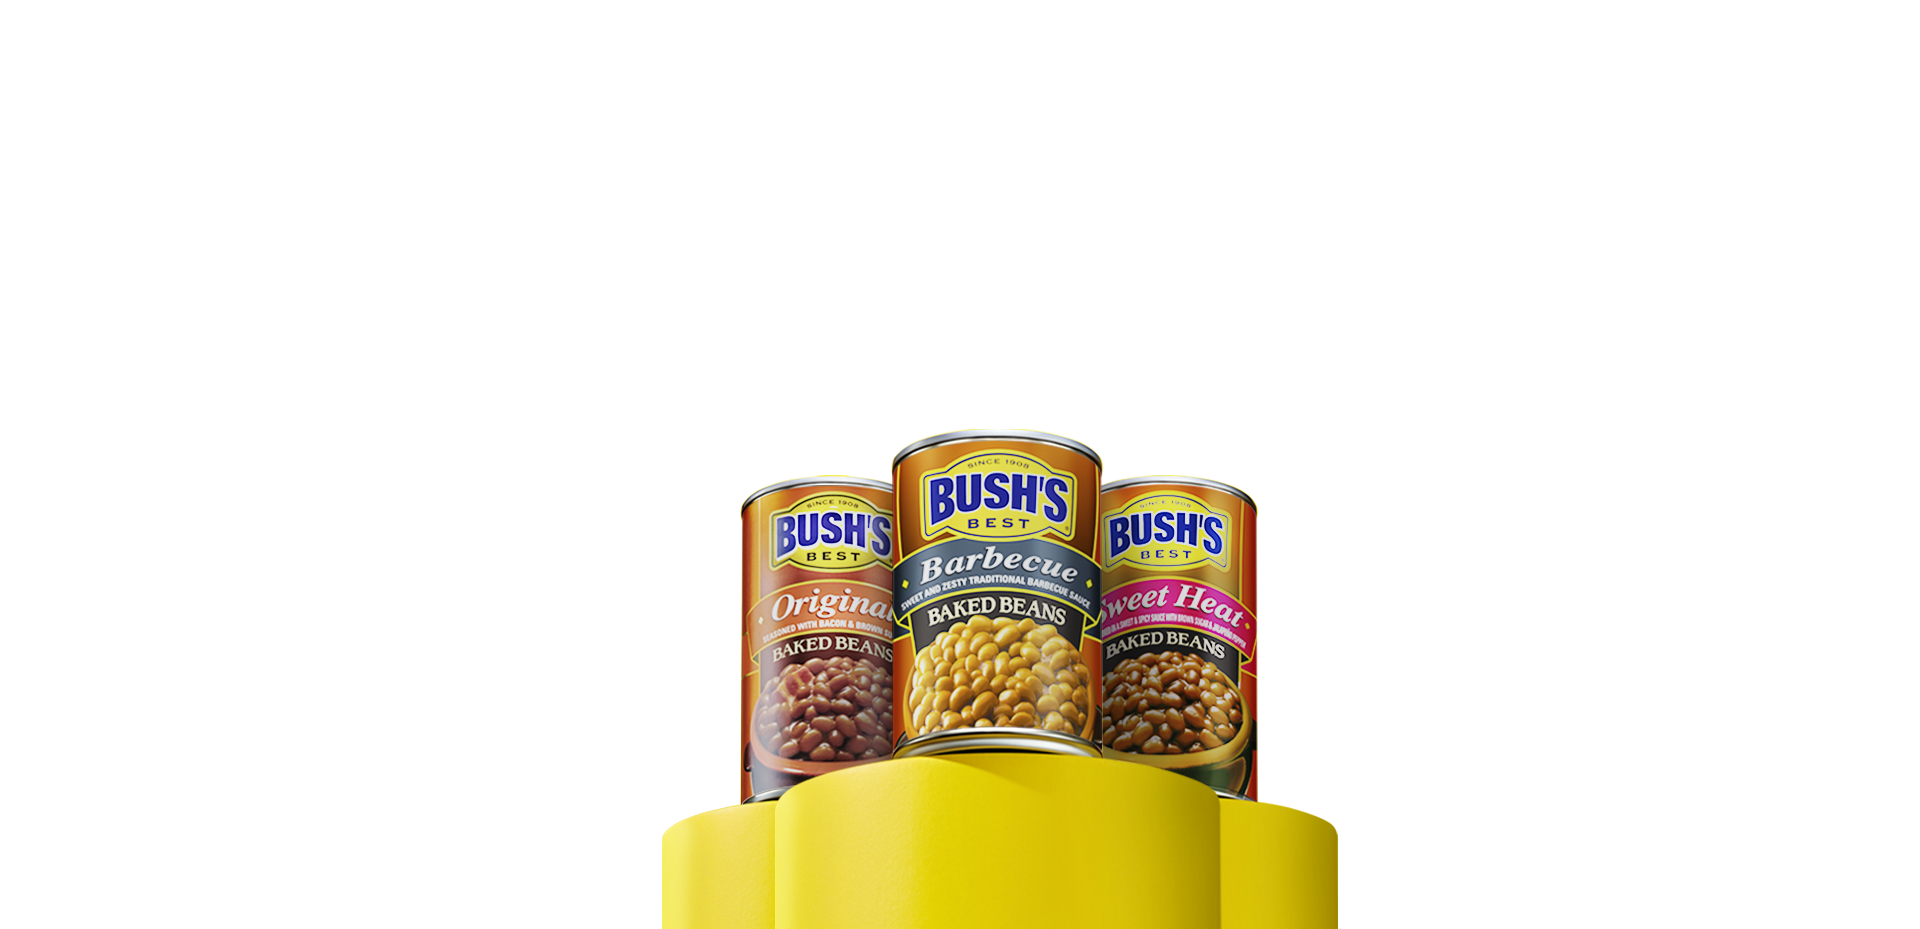 Cans of Bush’s Best Original Baked Beans, Barbecue Baked Beans and Sweet Heat Baked Beans sitting on three yellow columns